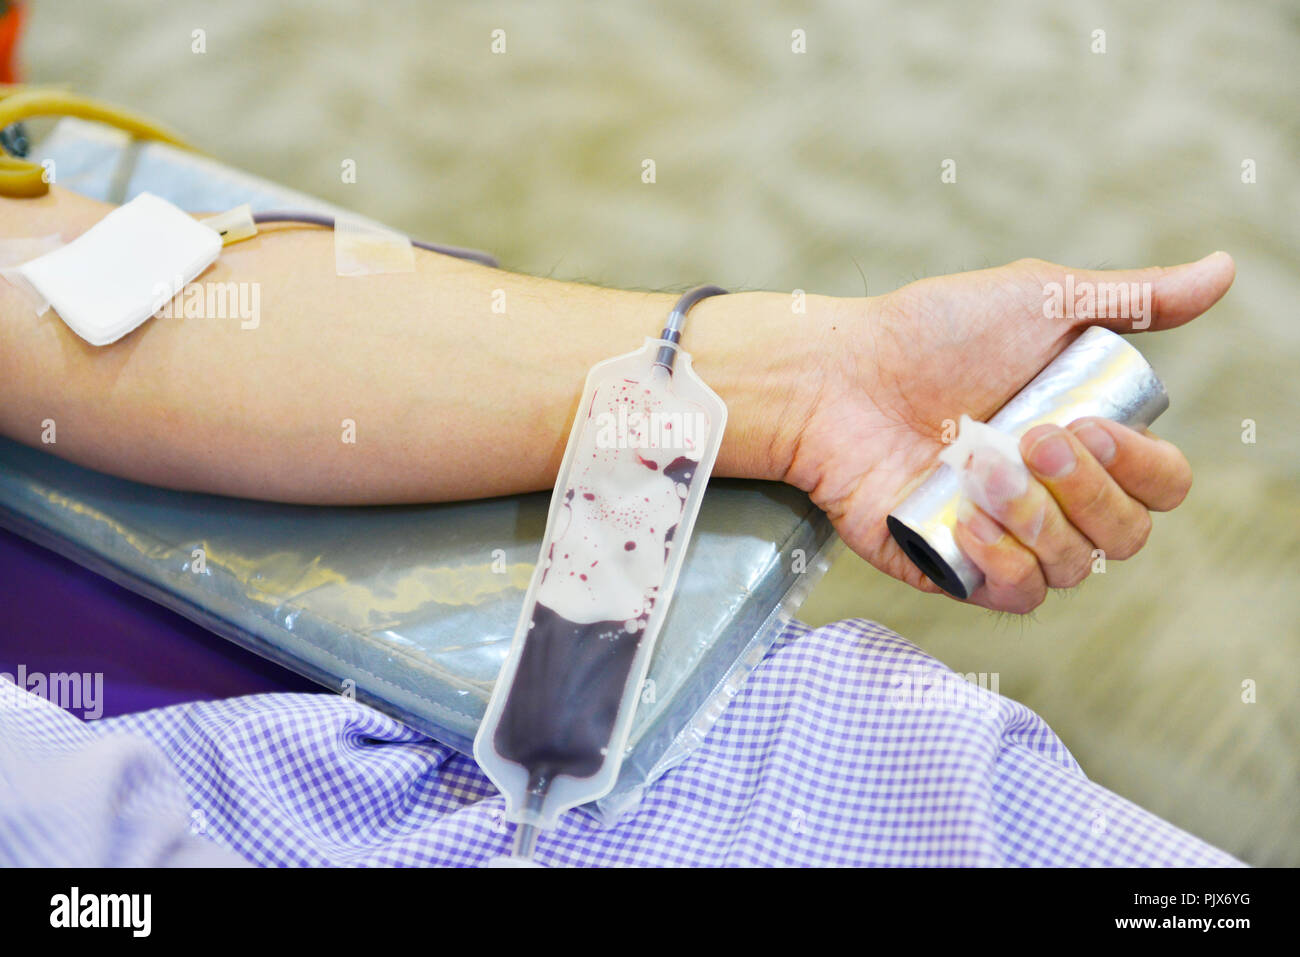 Blood donation, blood transfusion, check specified, fasting, health care in hospital Stock Photo